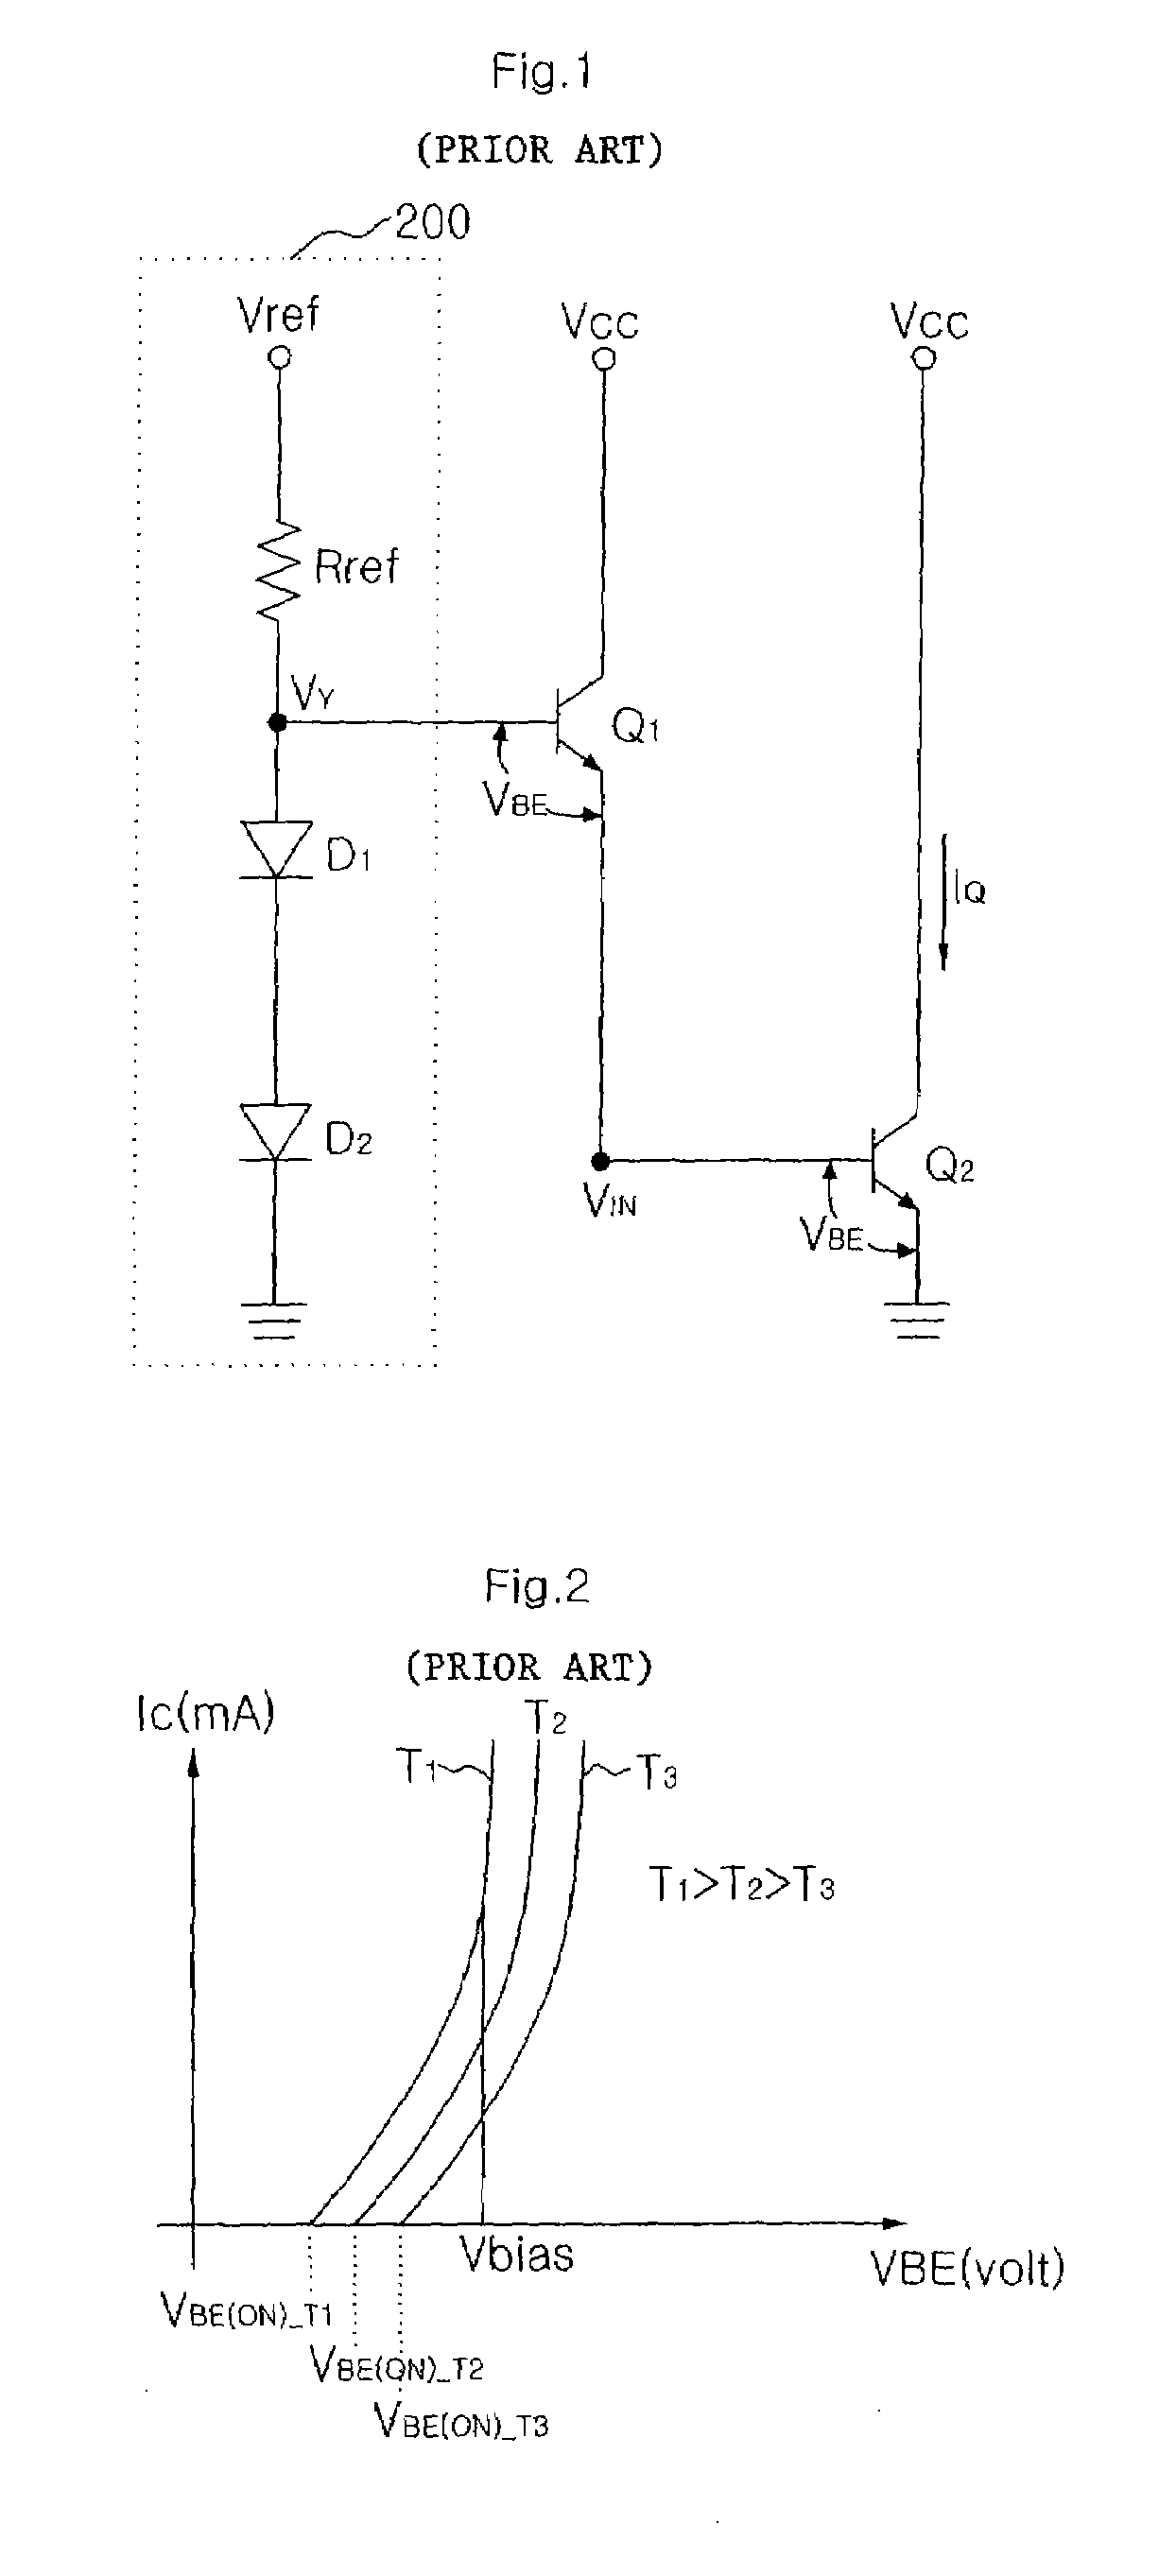 Temperature-compensated circuit for power amplifier using diode voltage control